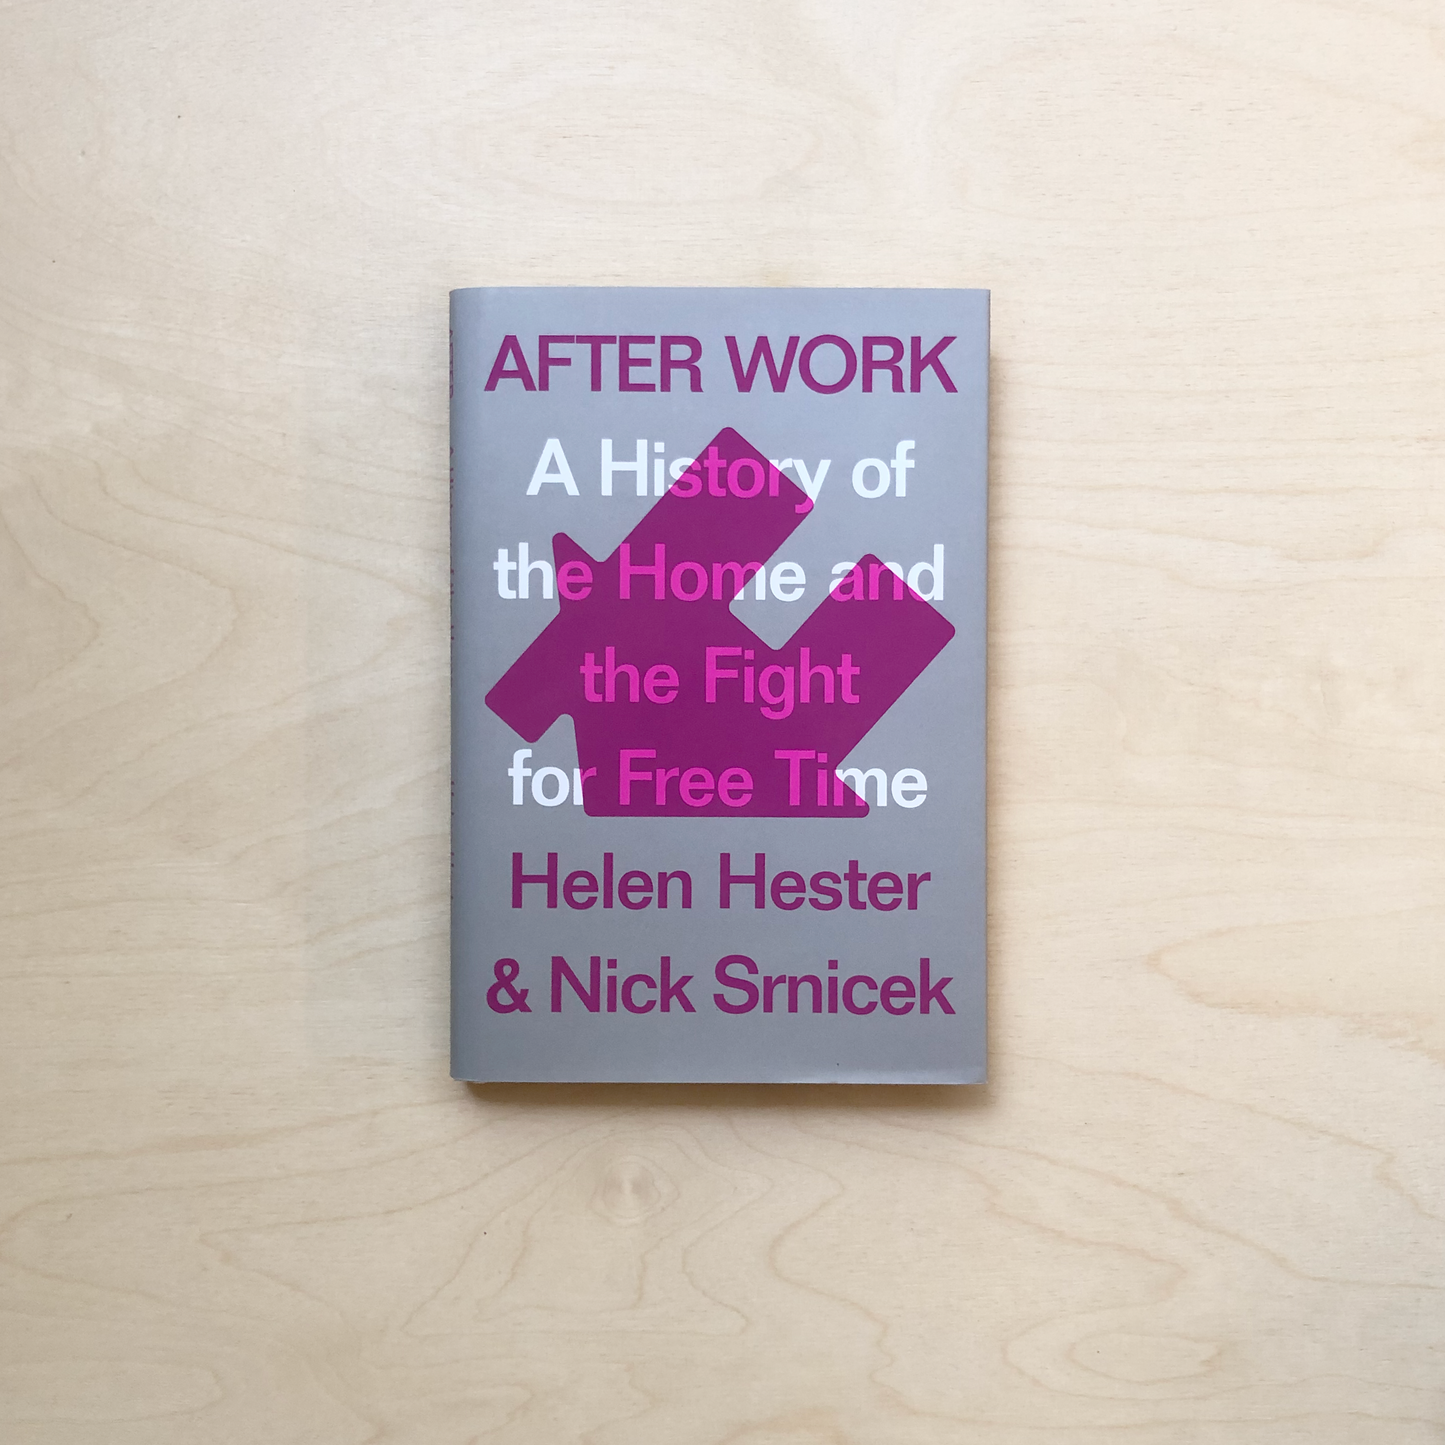 After Work - A History of the Home and the Fight for Free Time